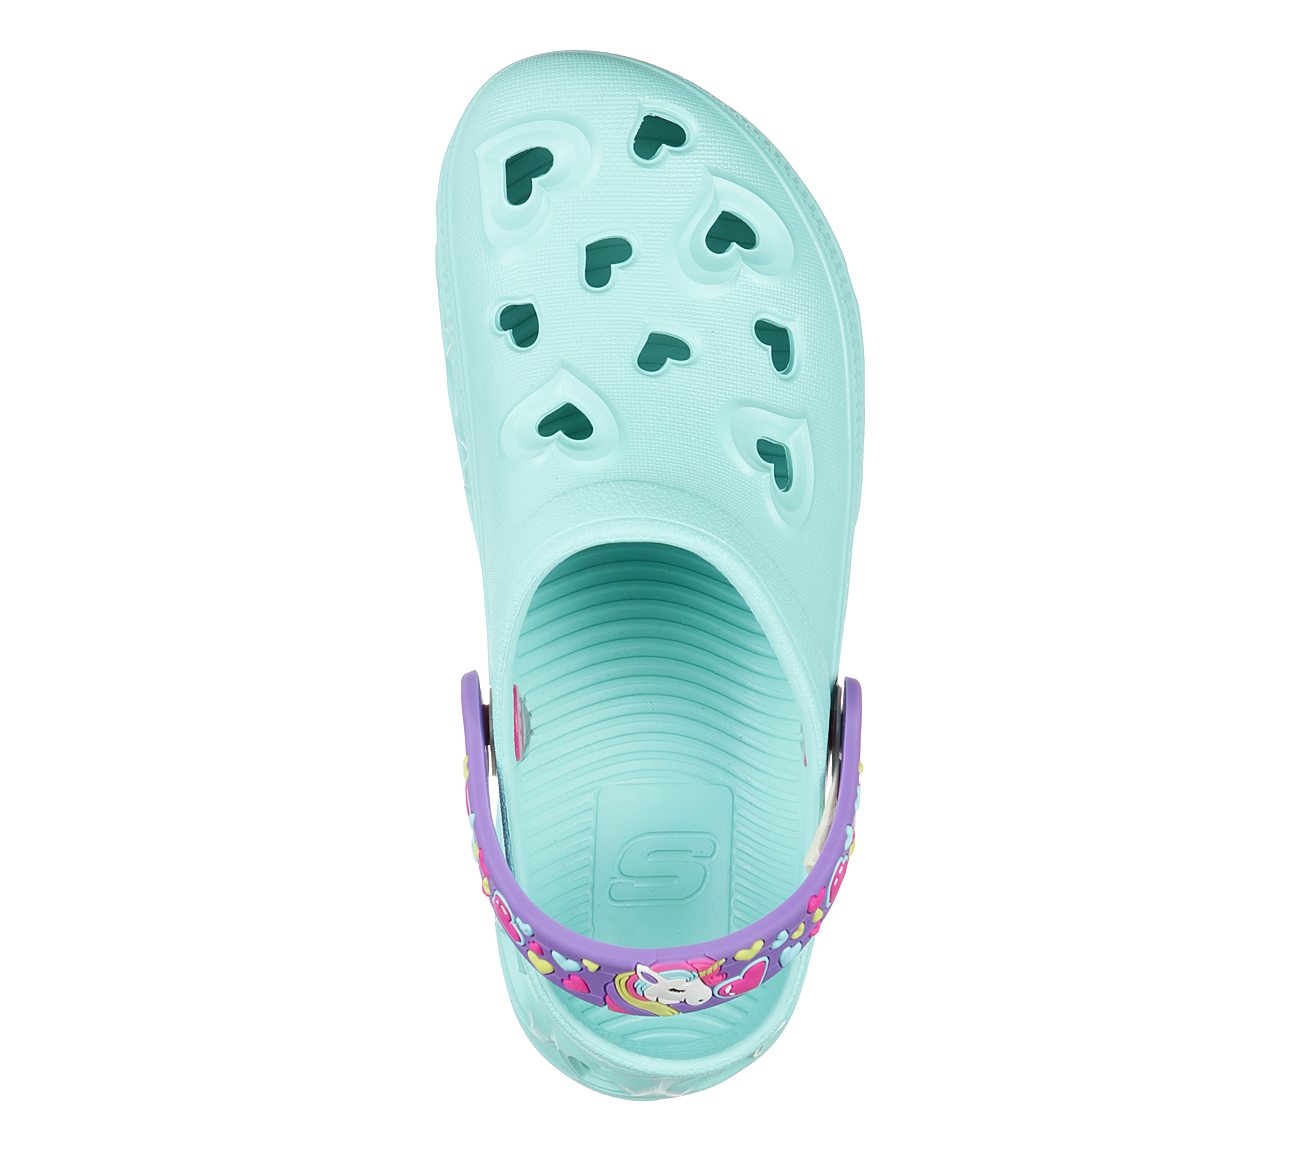 LIGHT HEARTED-UNICORNS & SUNS, TURQUOISE Footwear Top View